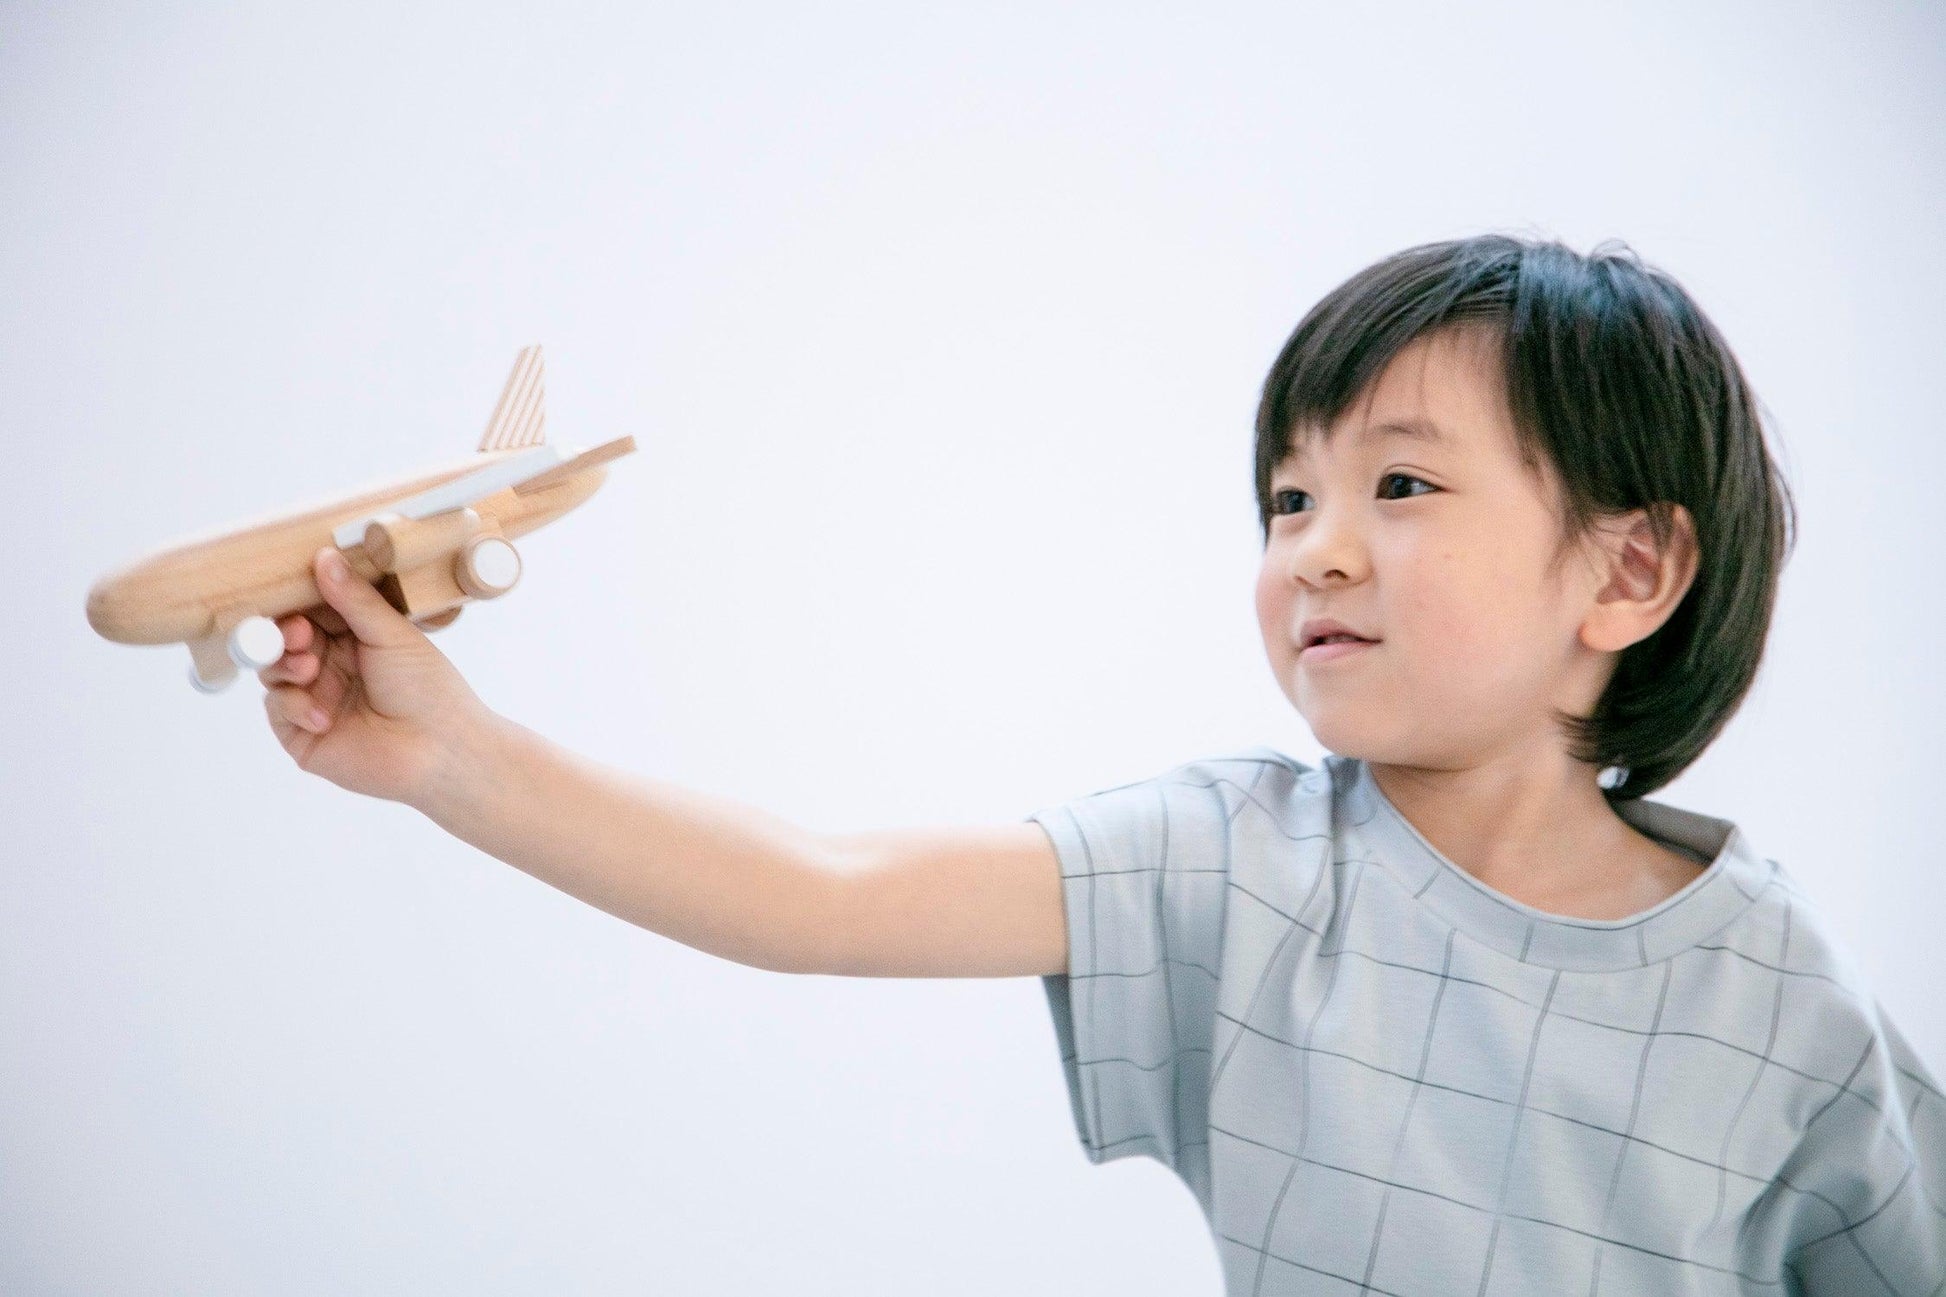 Wooden Jet Plane for Tiny Hands - Gigglewick Gallery